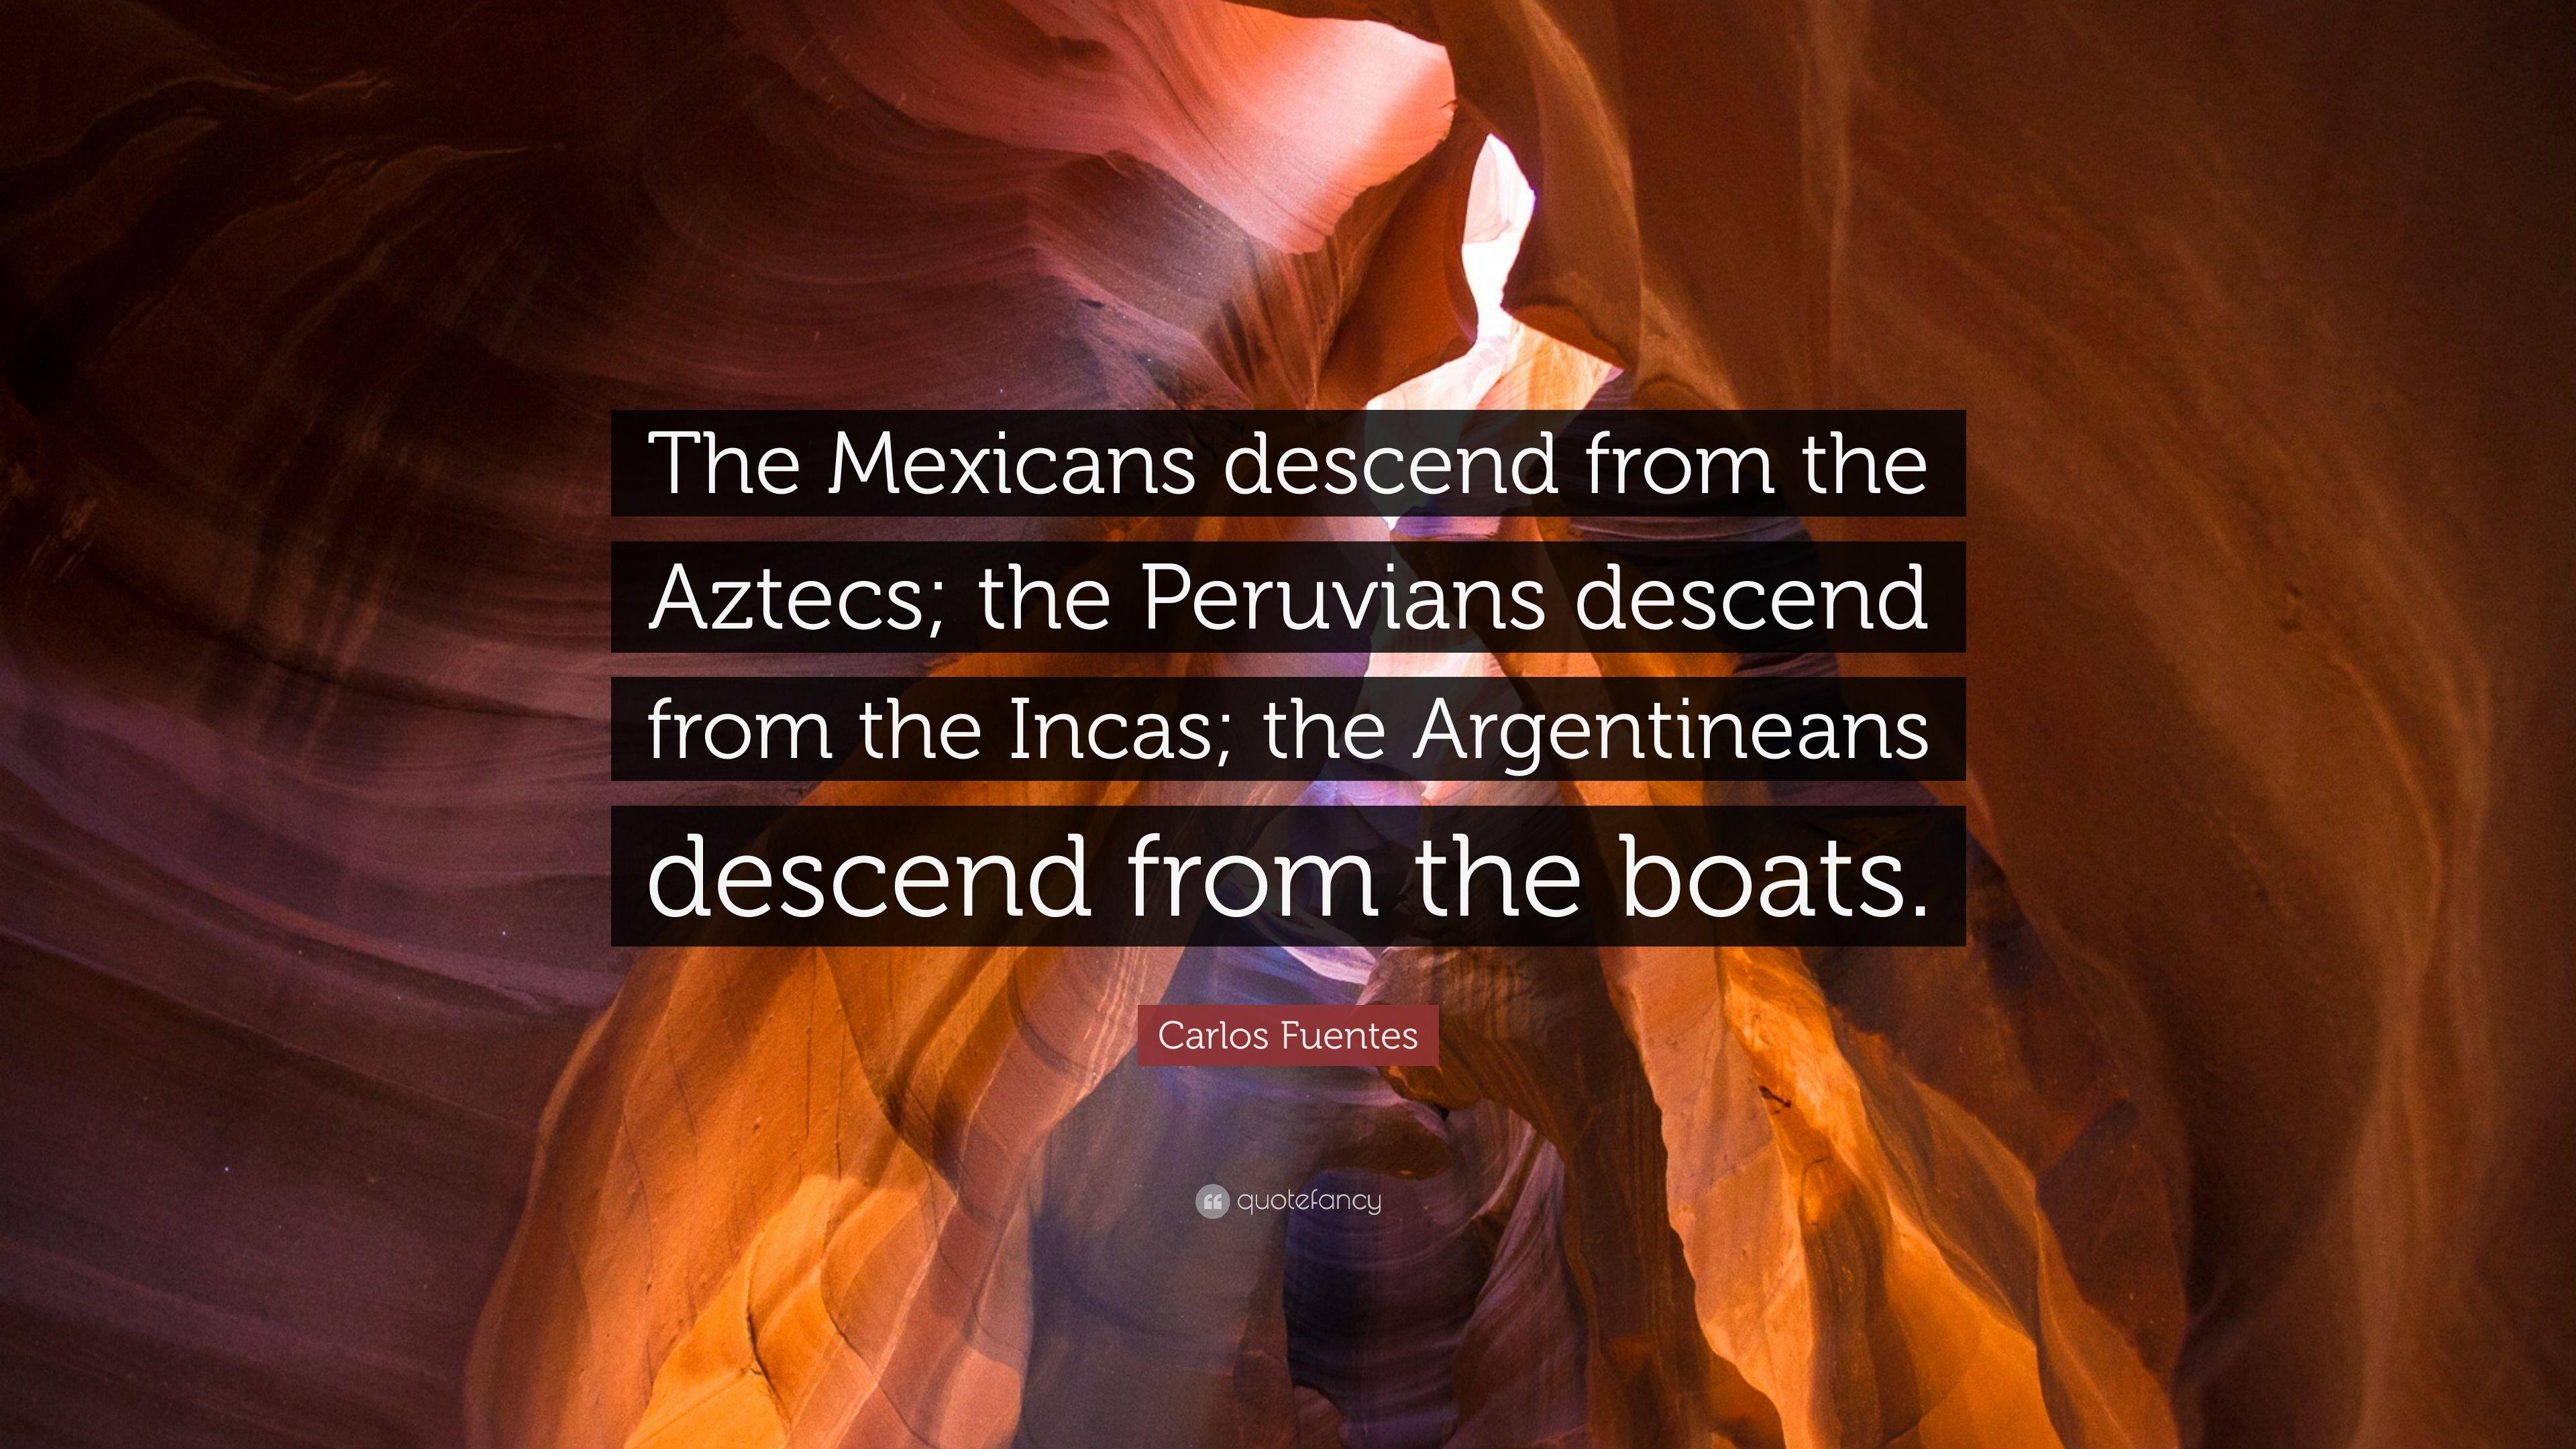 Carlos Fuentes Quote: “The Mexicans descend from the Aztecs;